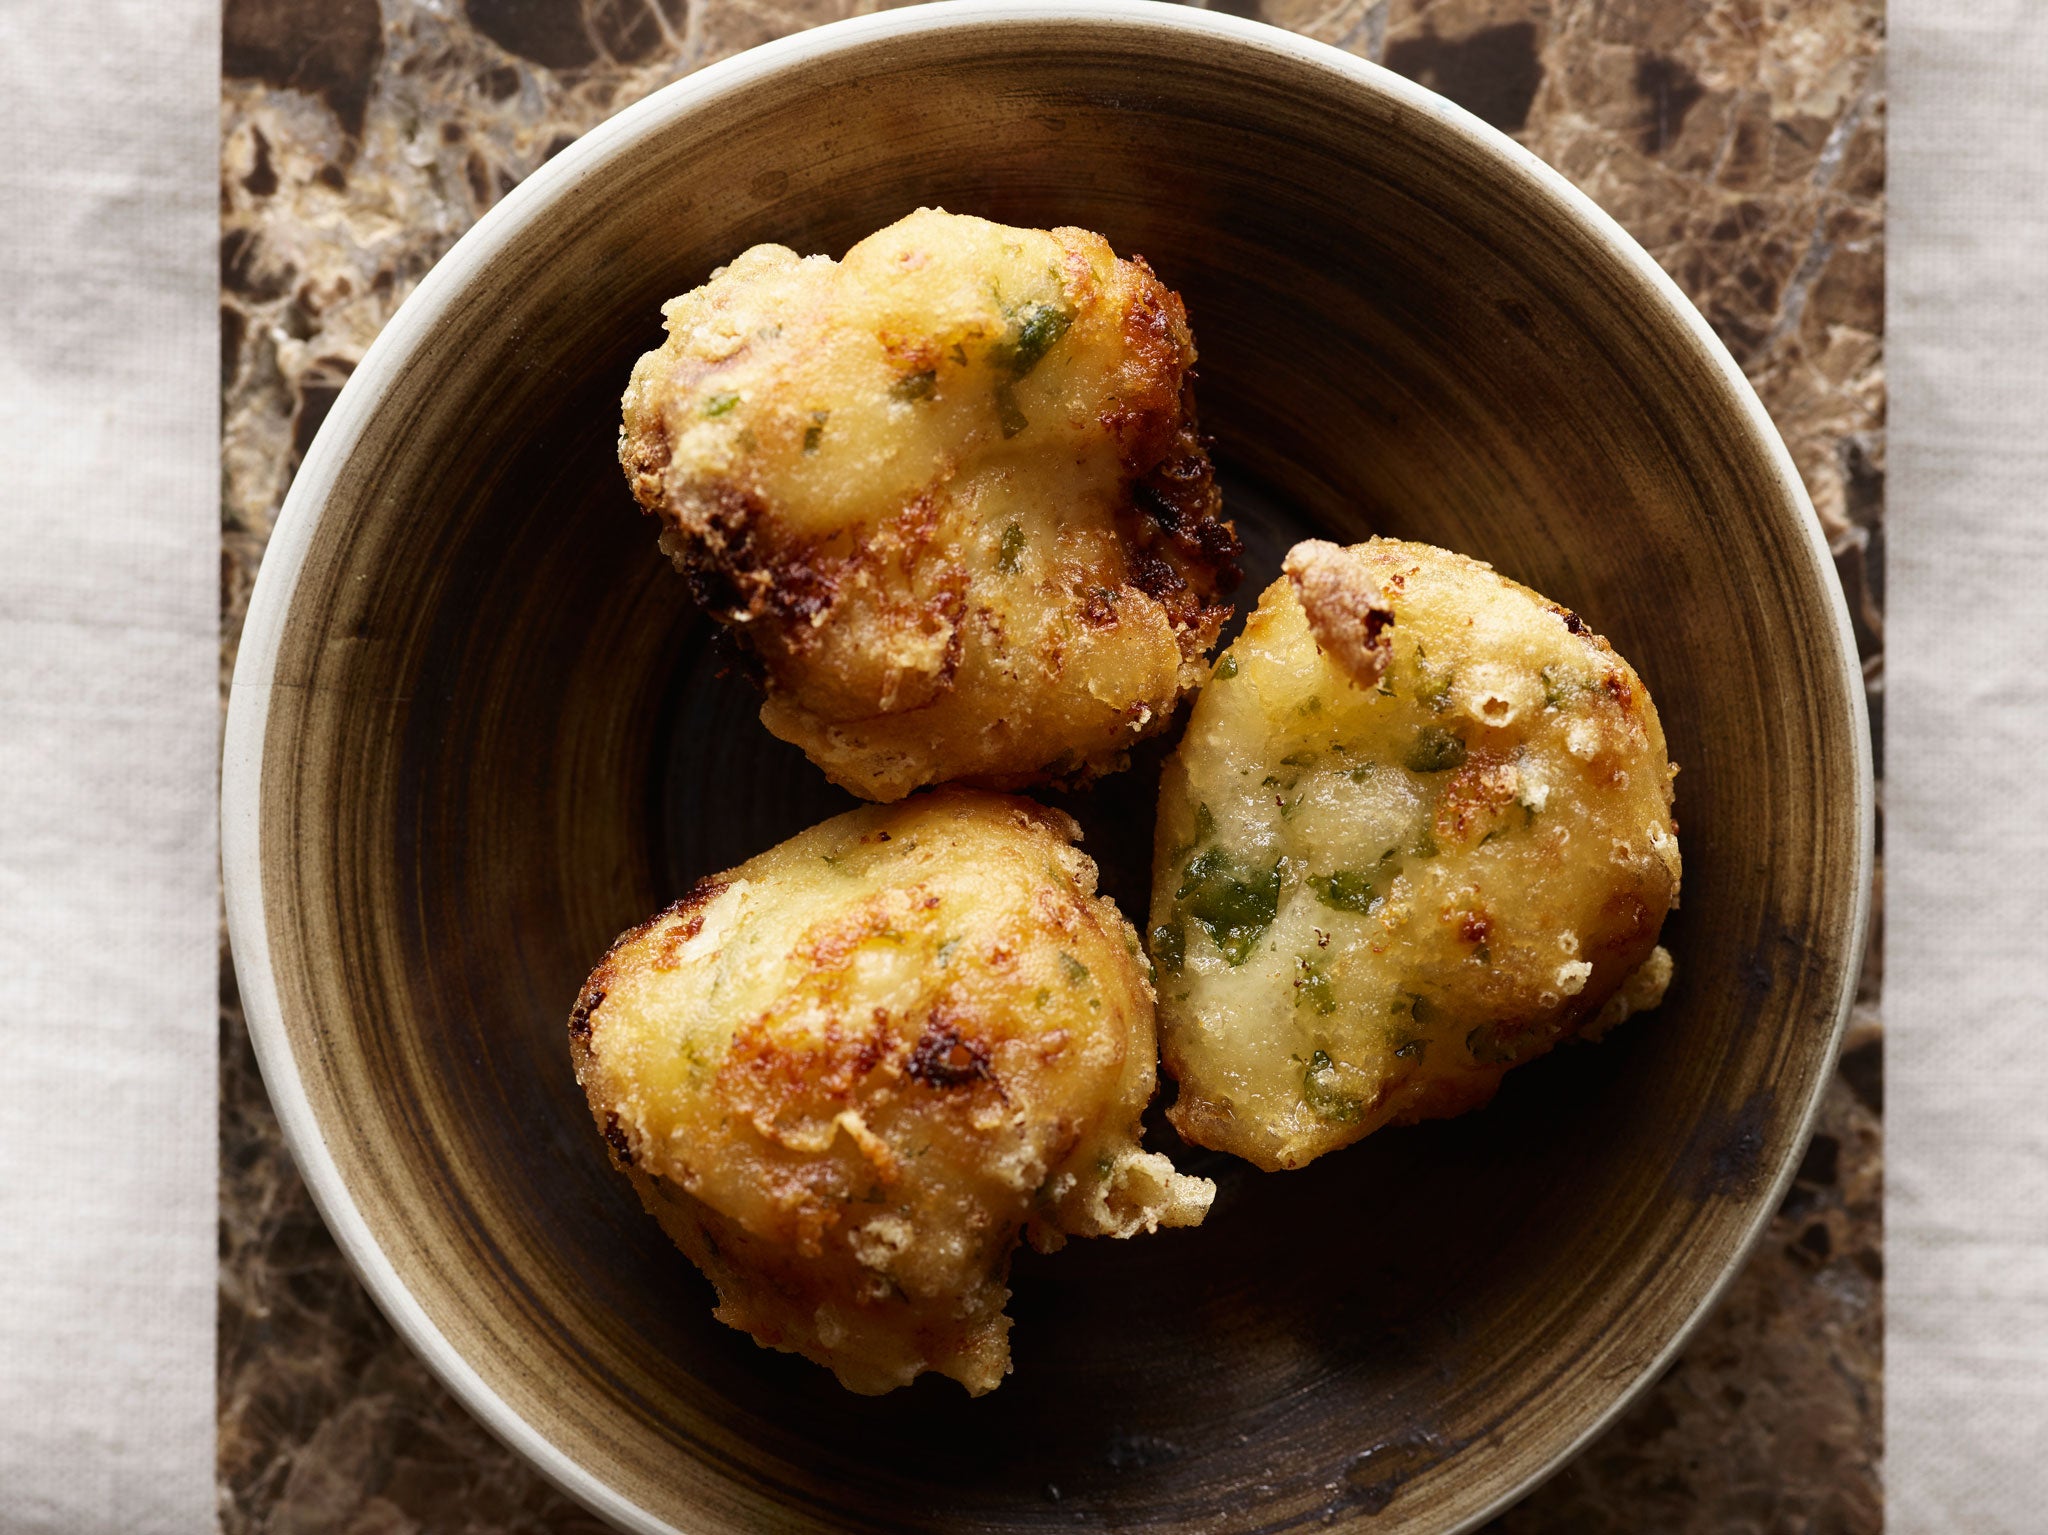 Serve Mark's cauliflower fritters as a starter, side dish or small snack